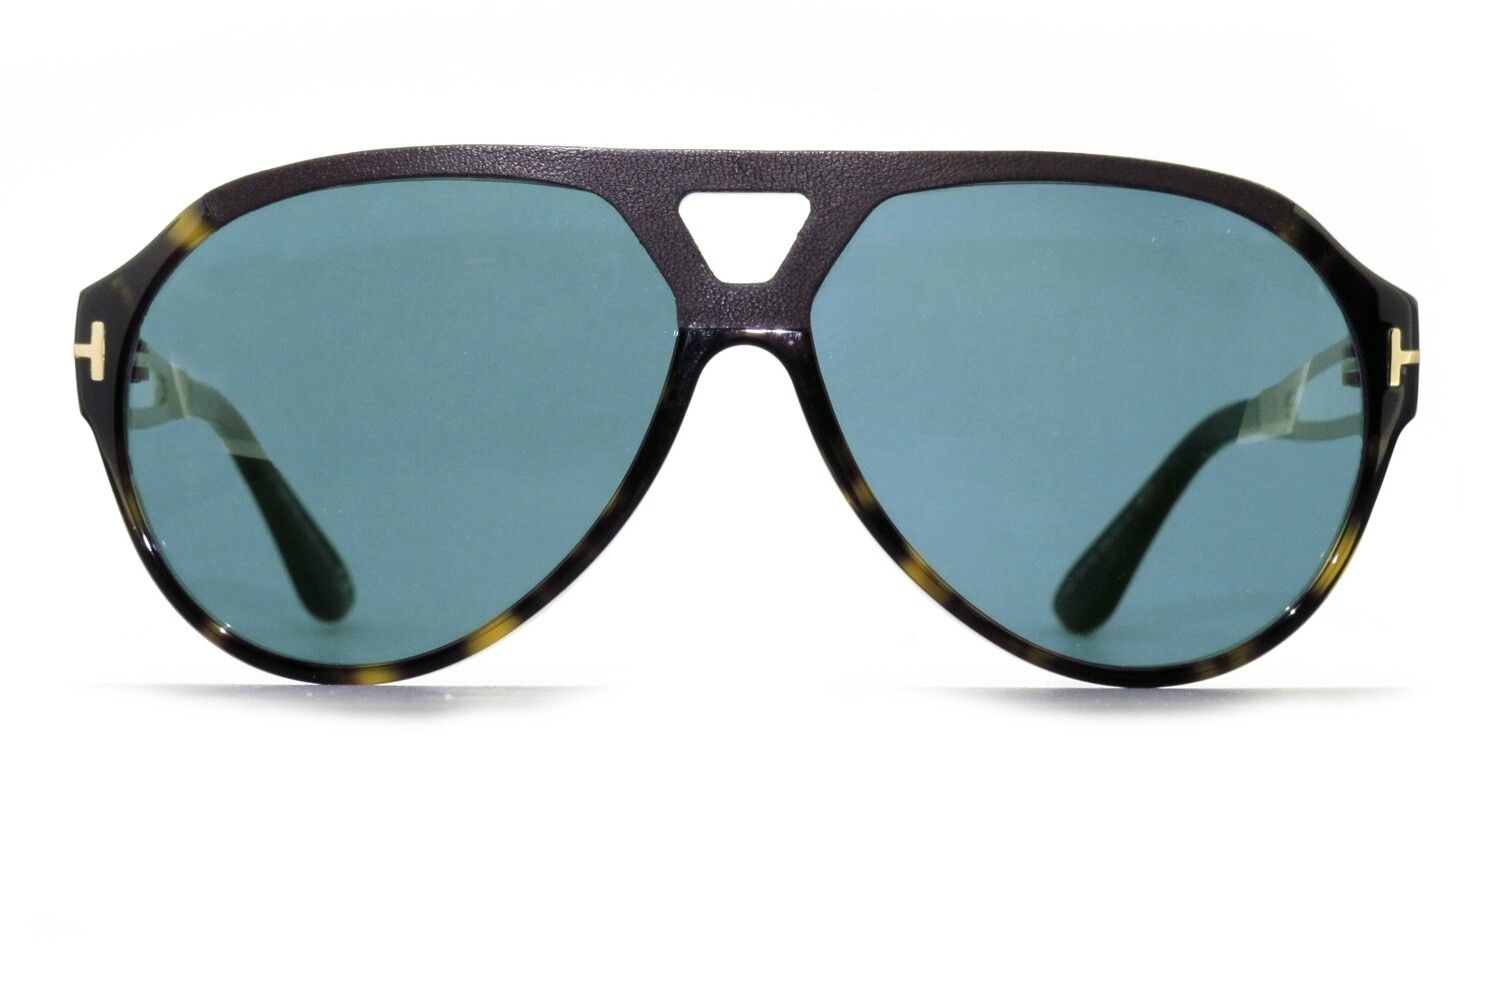 Paul TF778 by Tom Ford